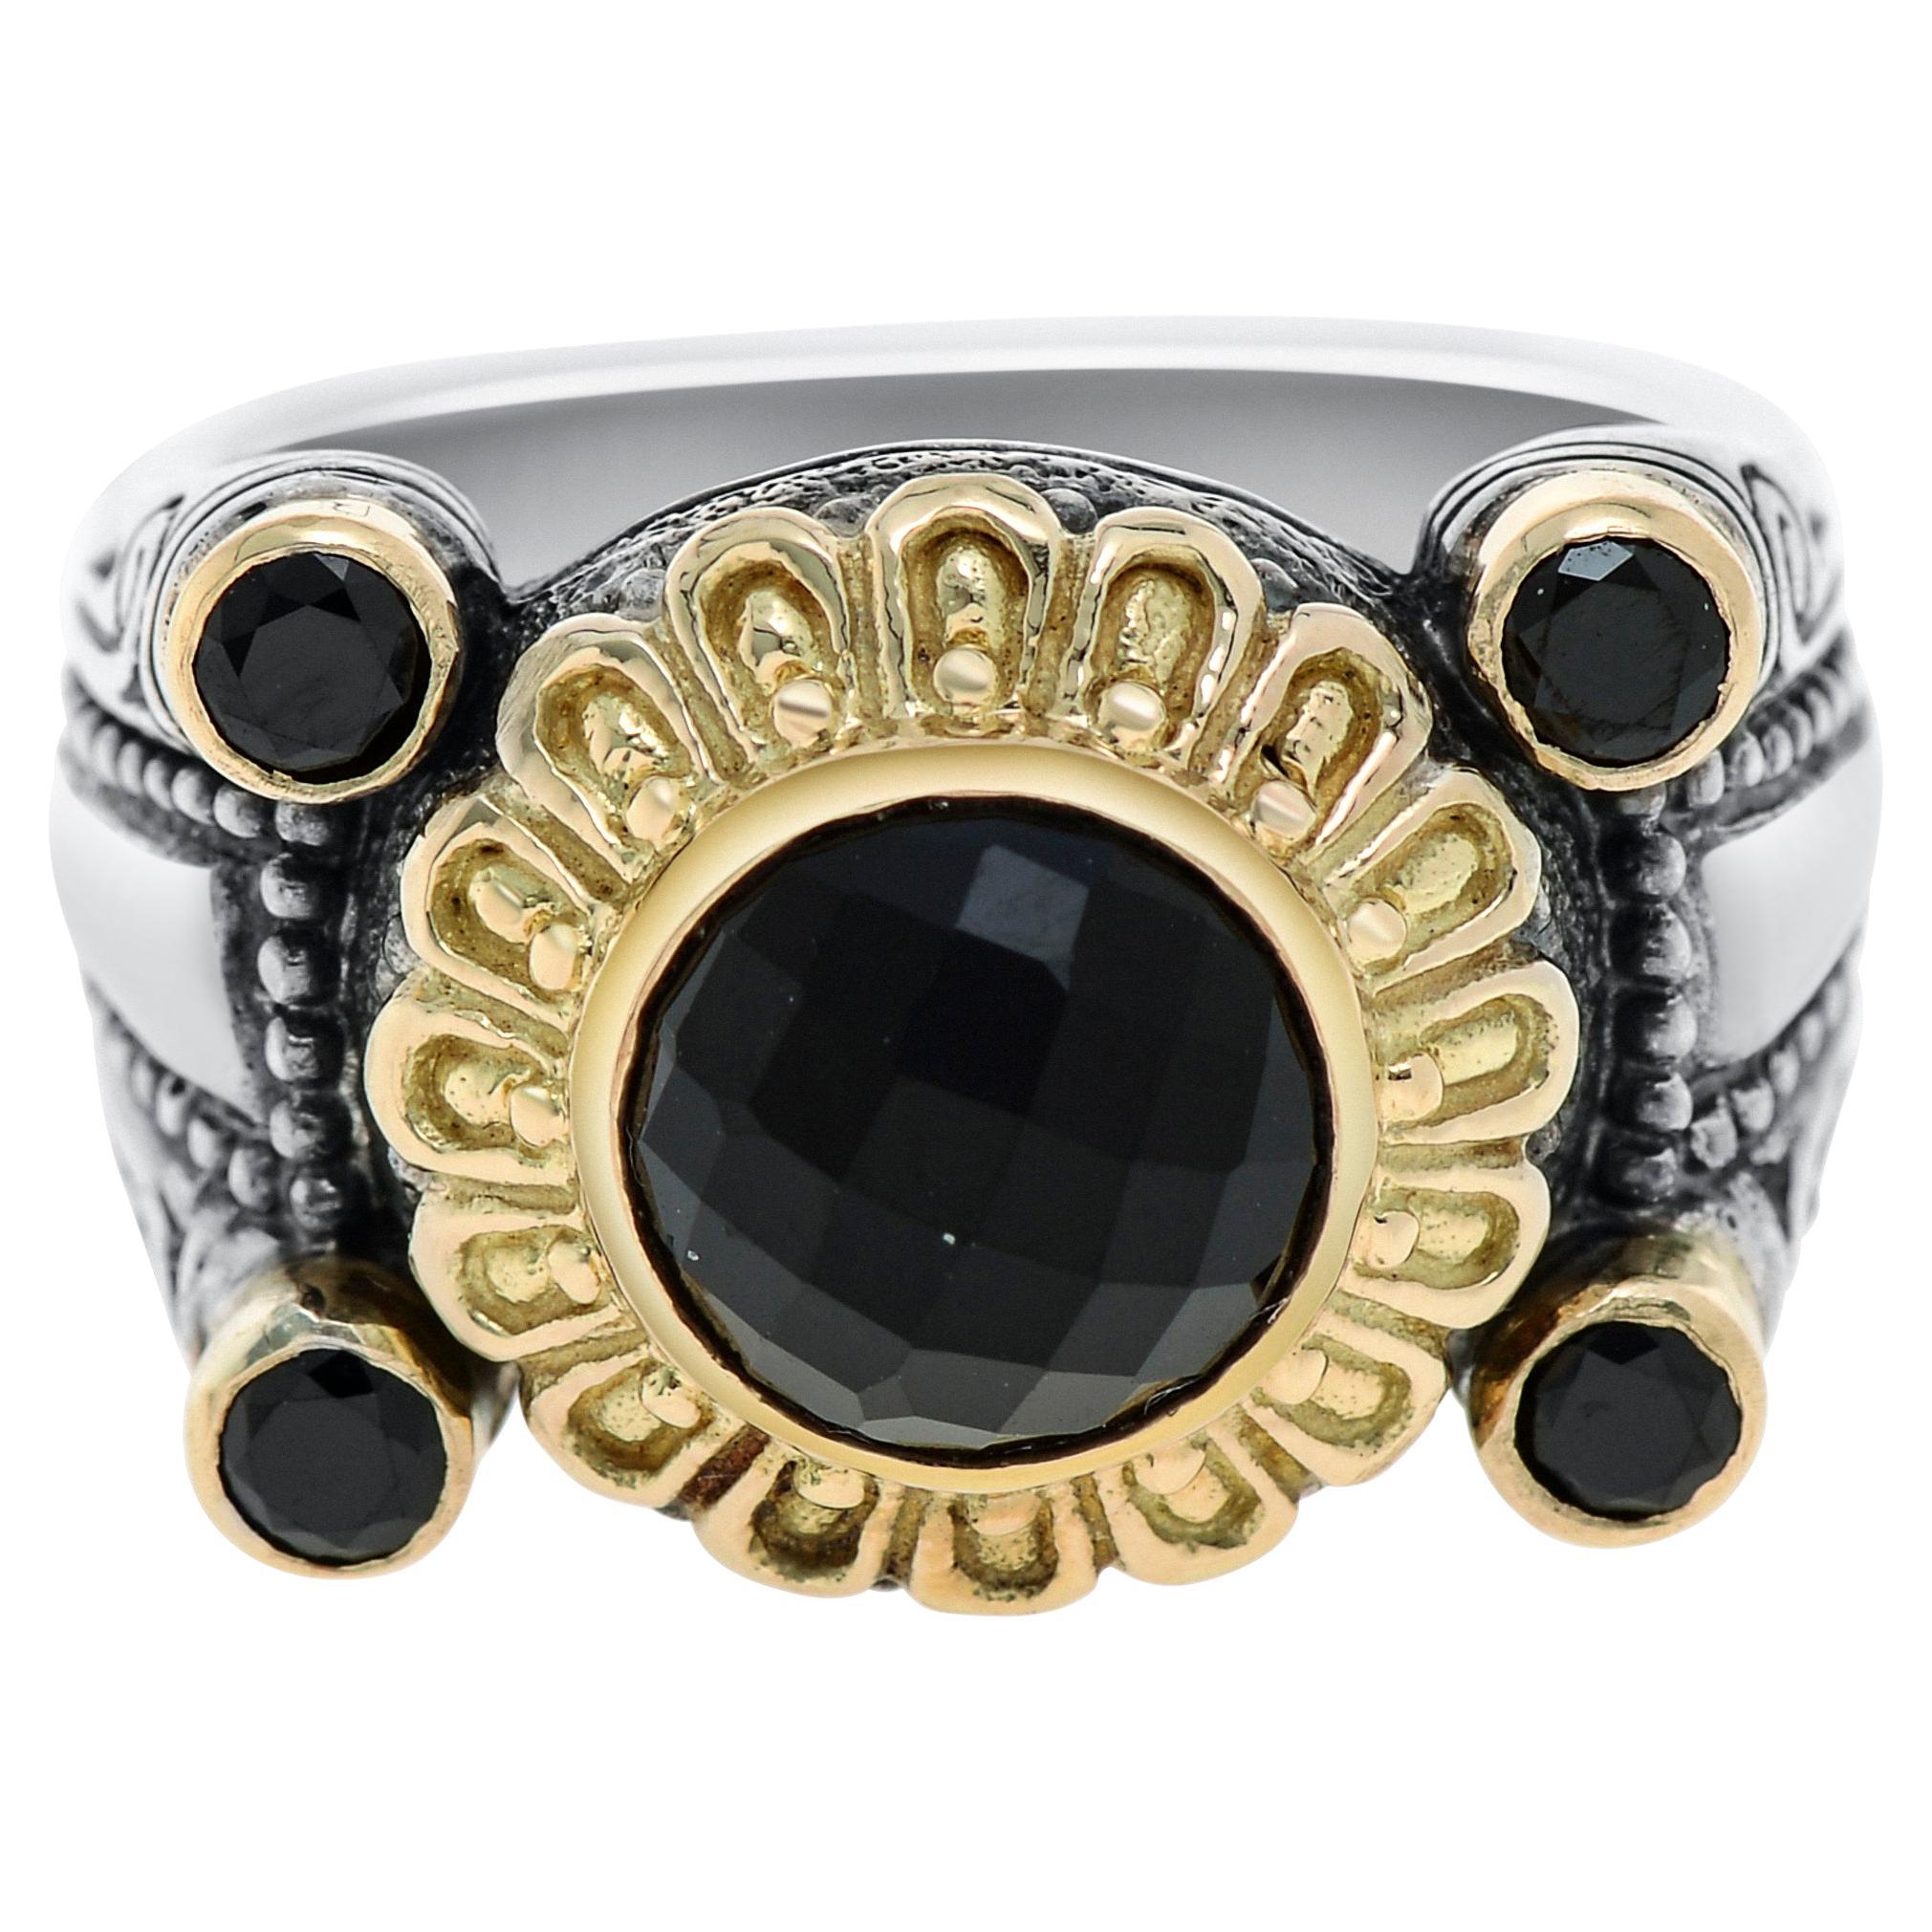 Konstantino Sterling Silver, 18K Gold and Onyx Ring sz 7.25 For Sale